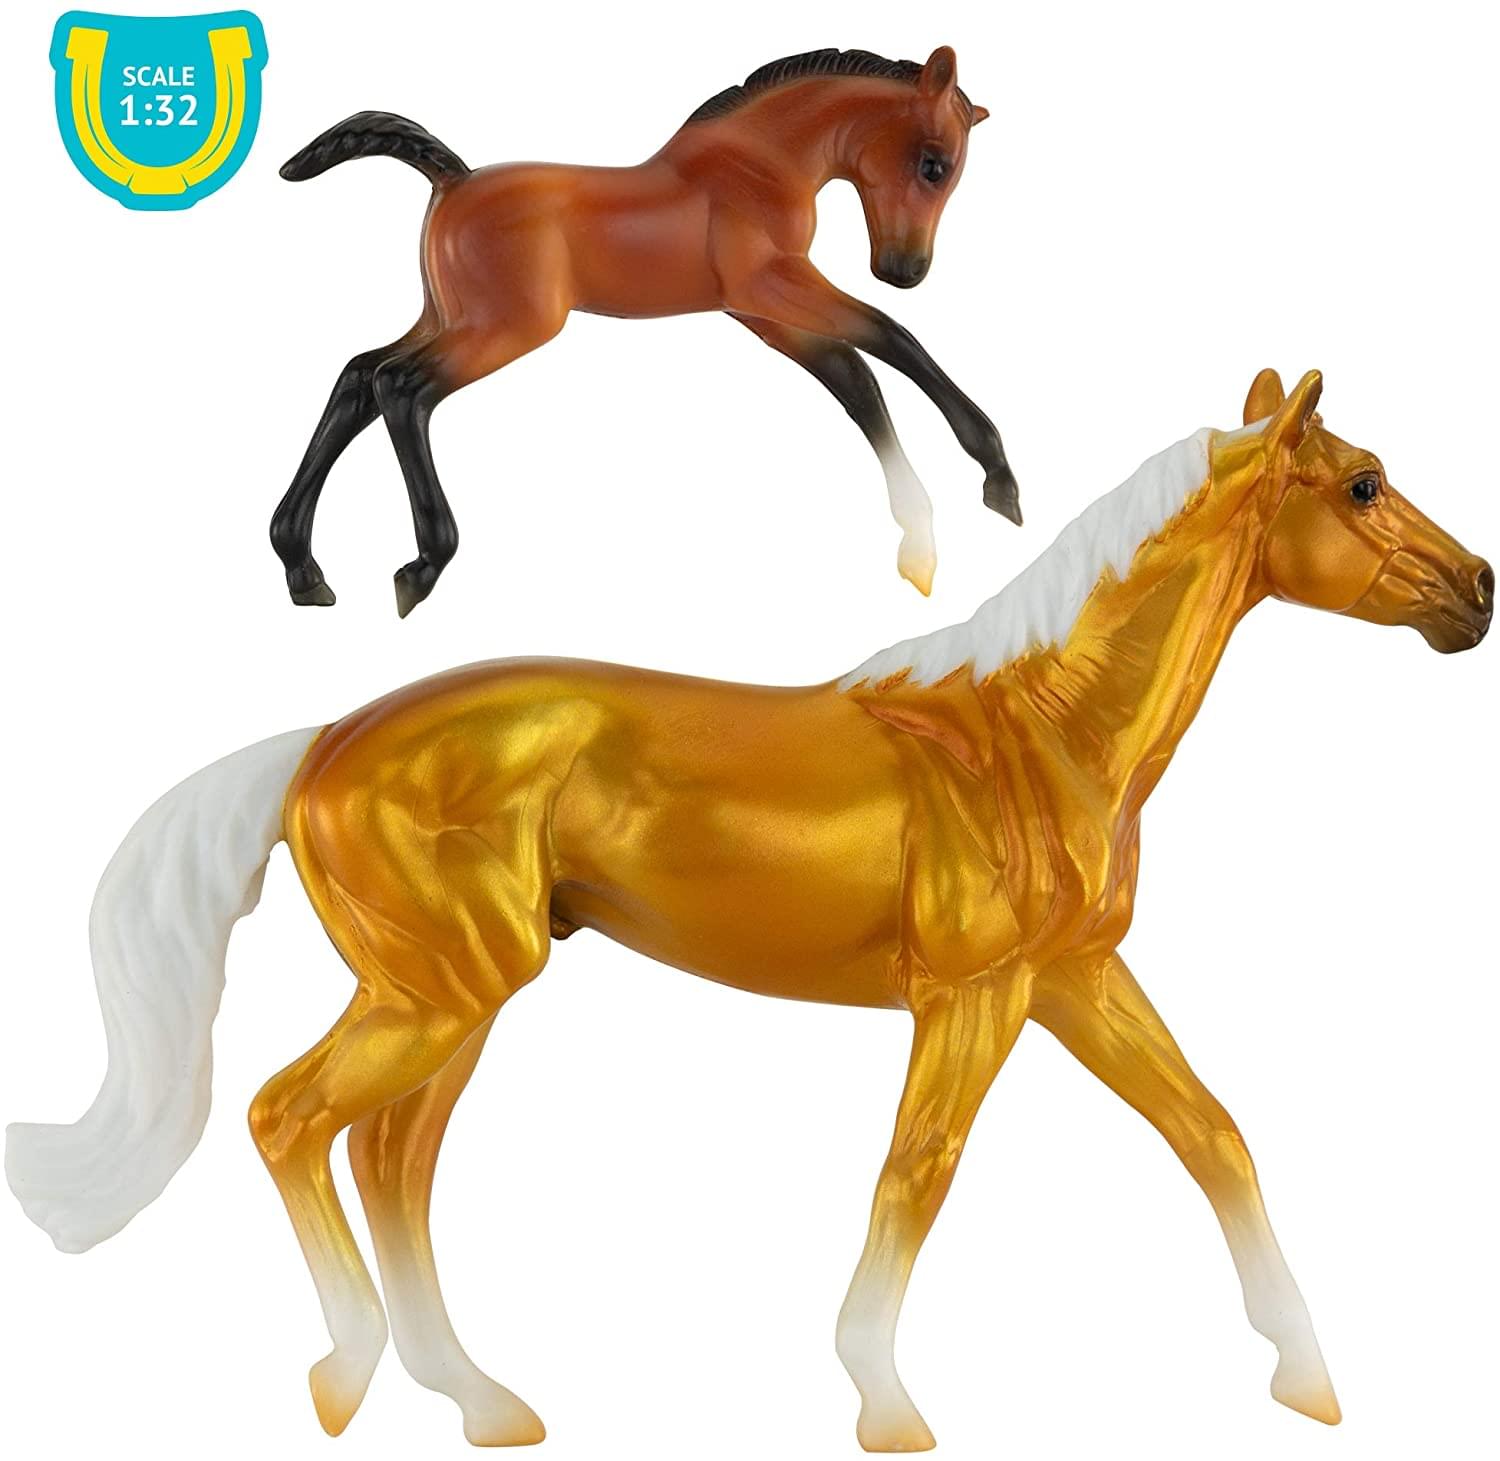 Breyer Stablemates 1:32 Scale Stable Surprise | One Random